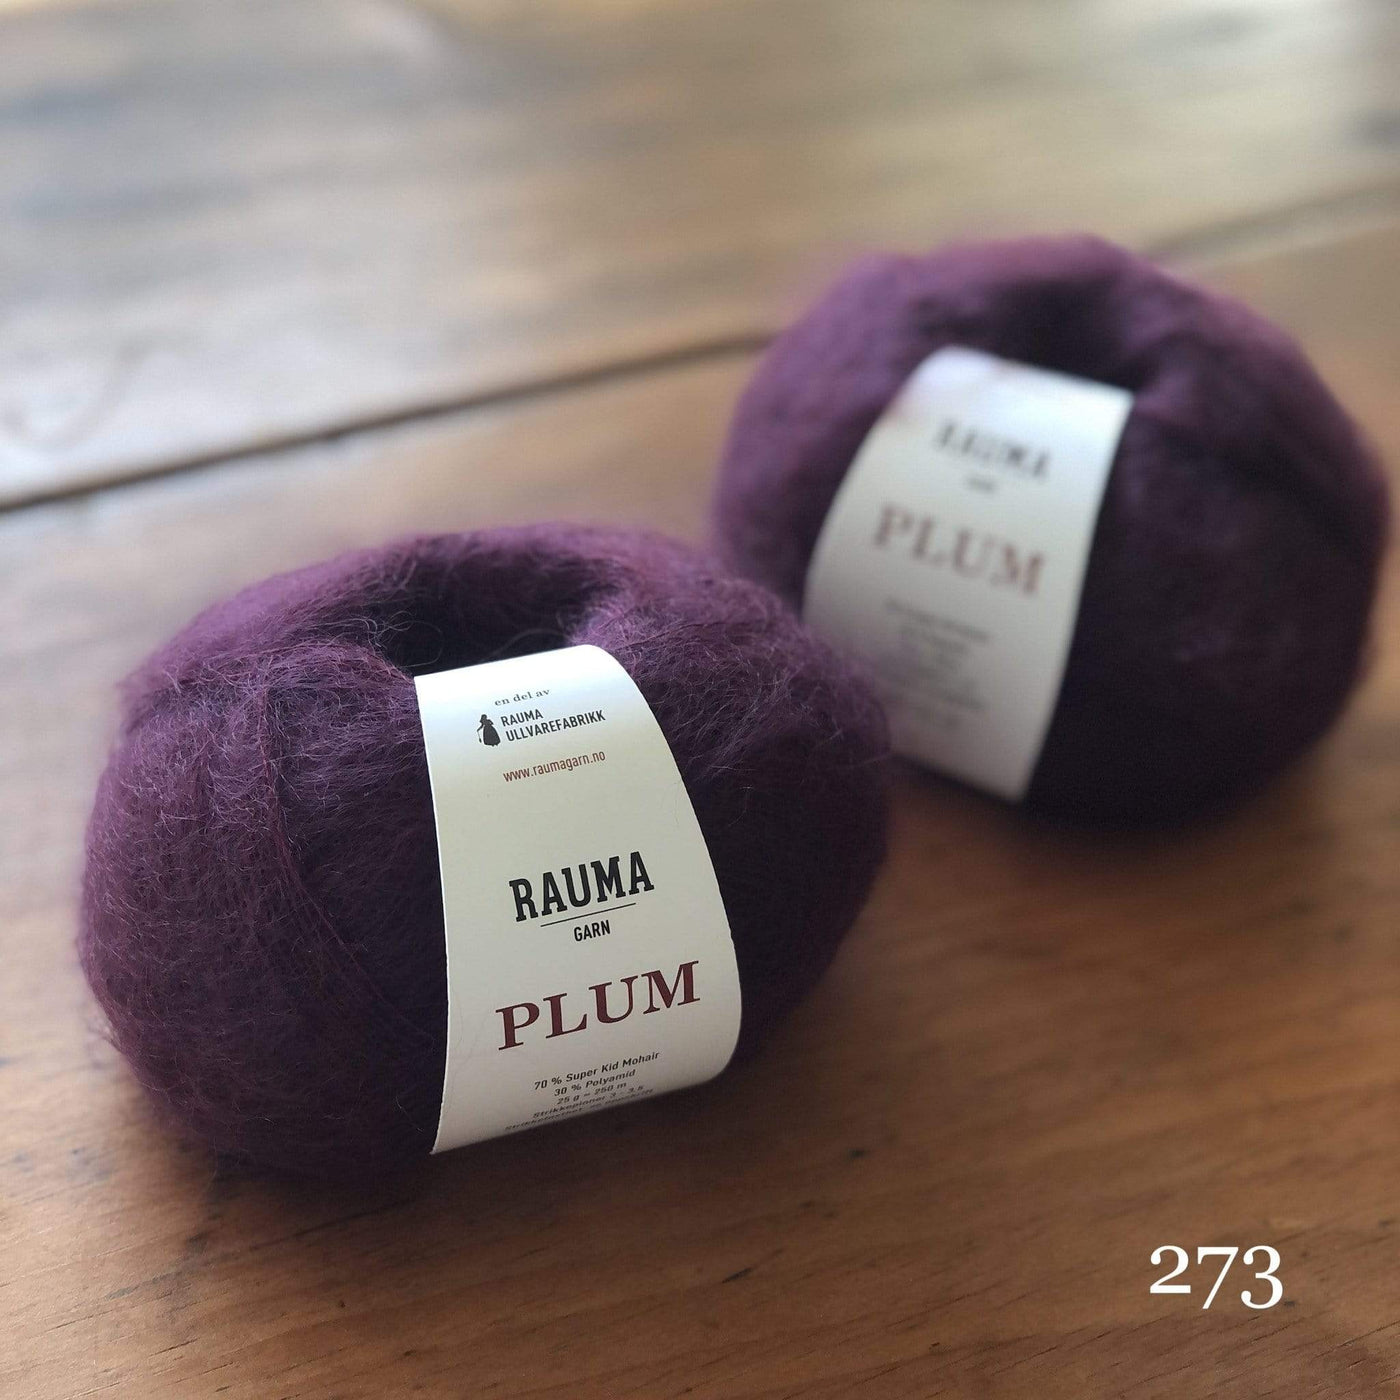 Two balls of Rauma Plum, a laceweight mohair blend yarn, in color 273, a rich plum purple